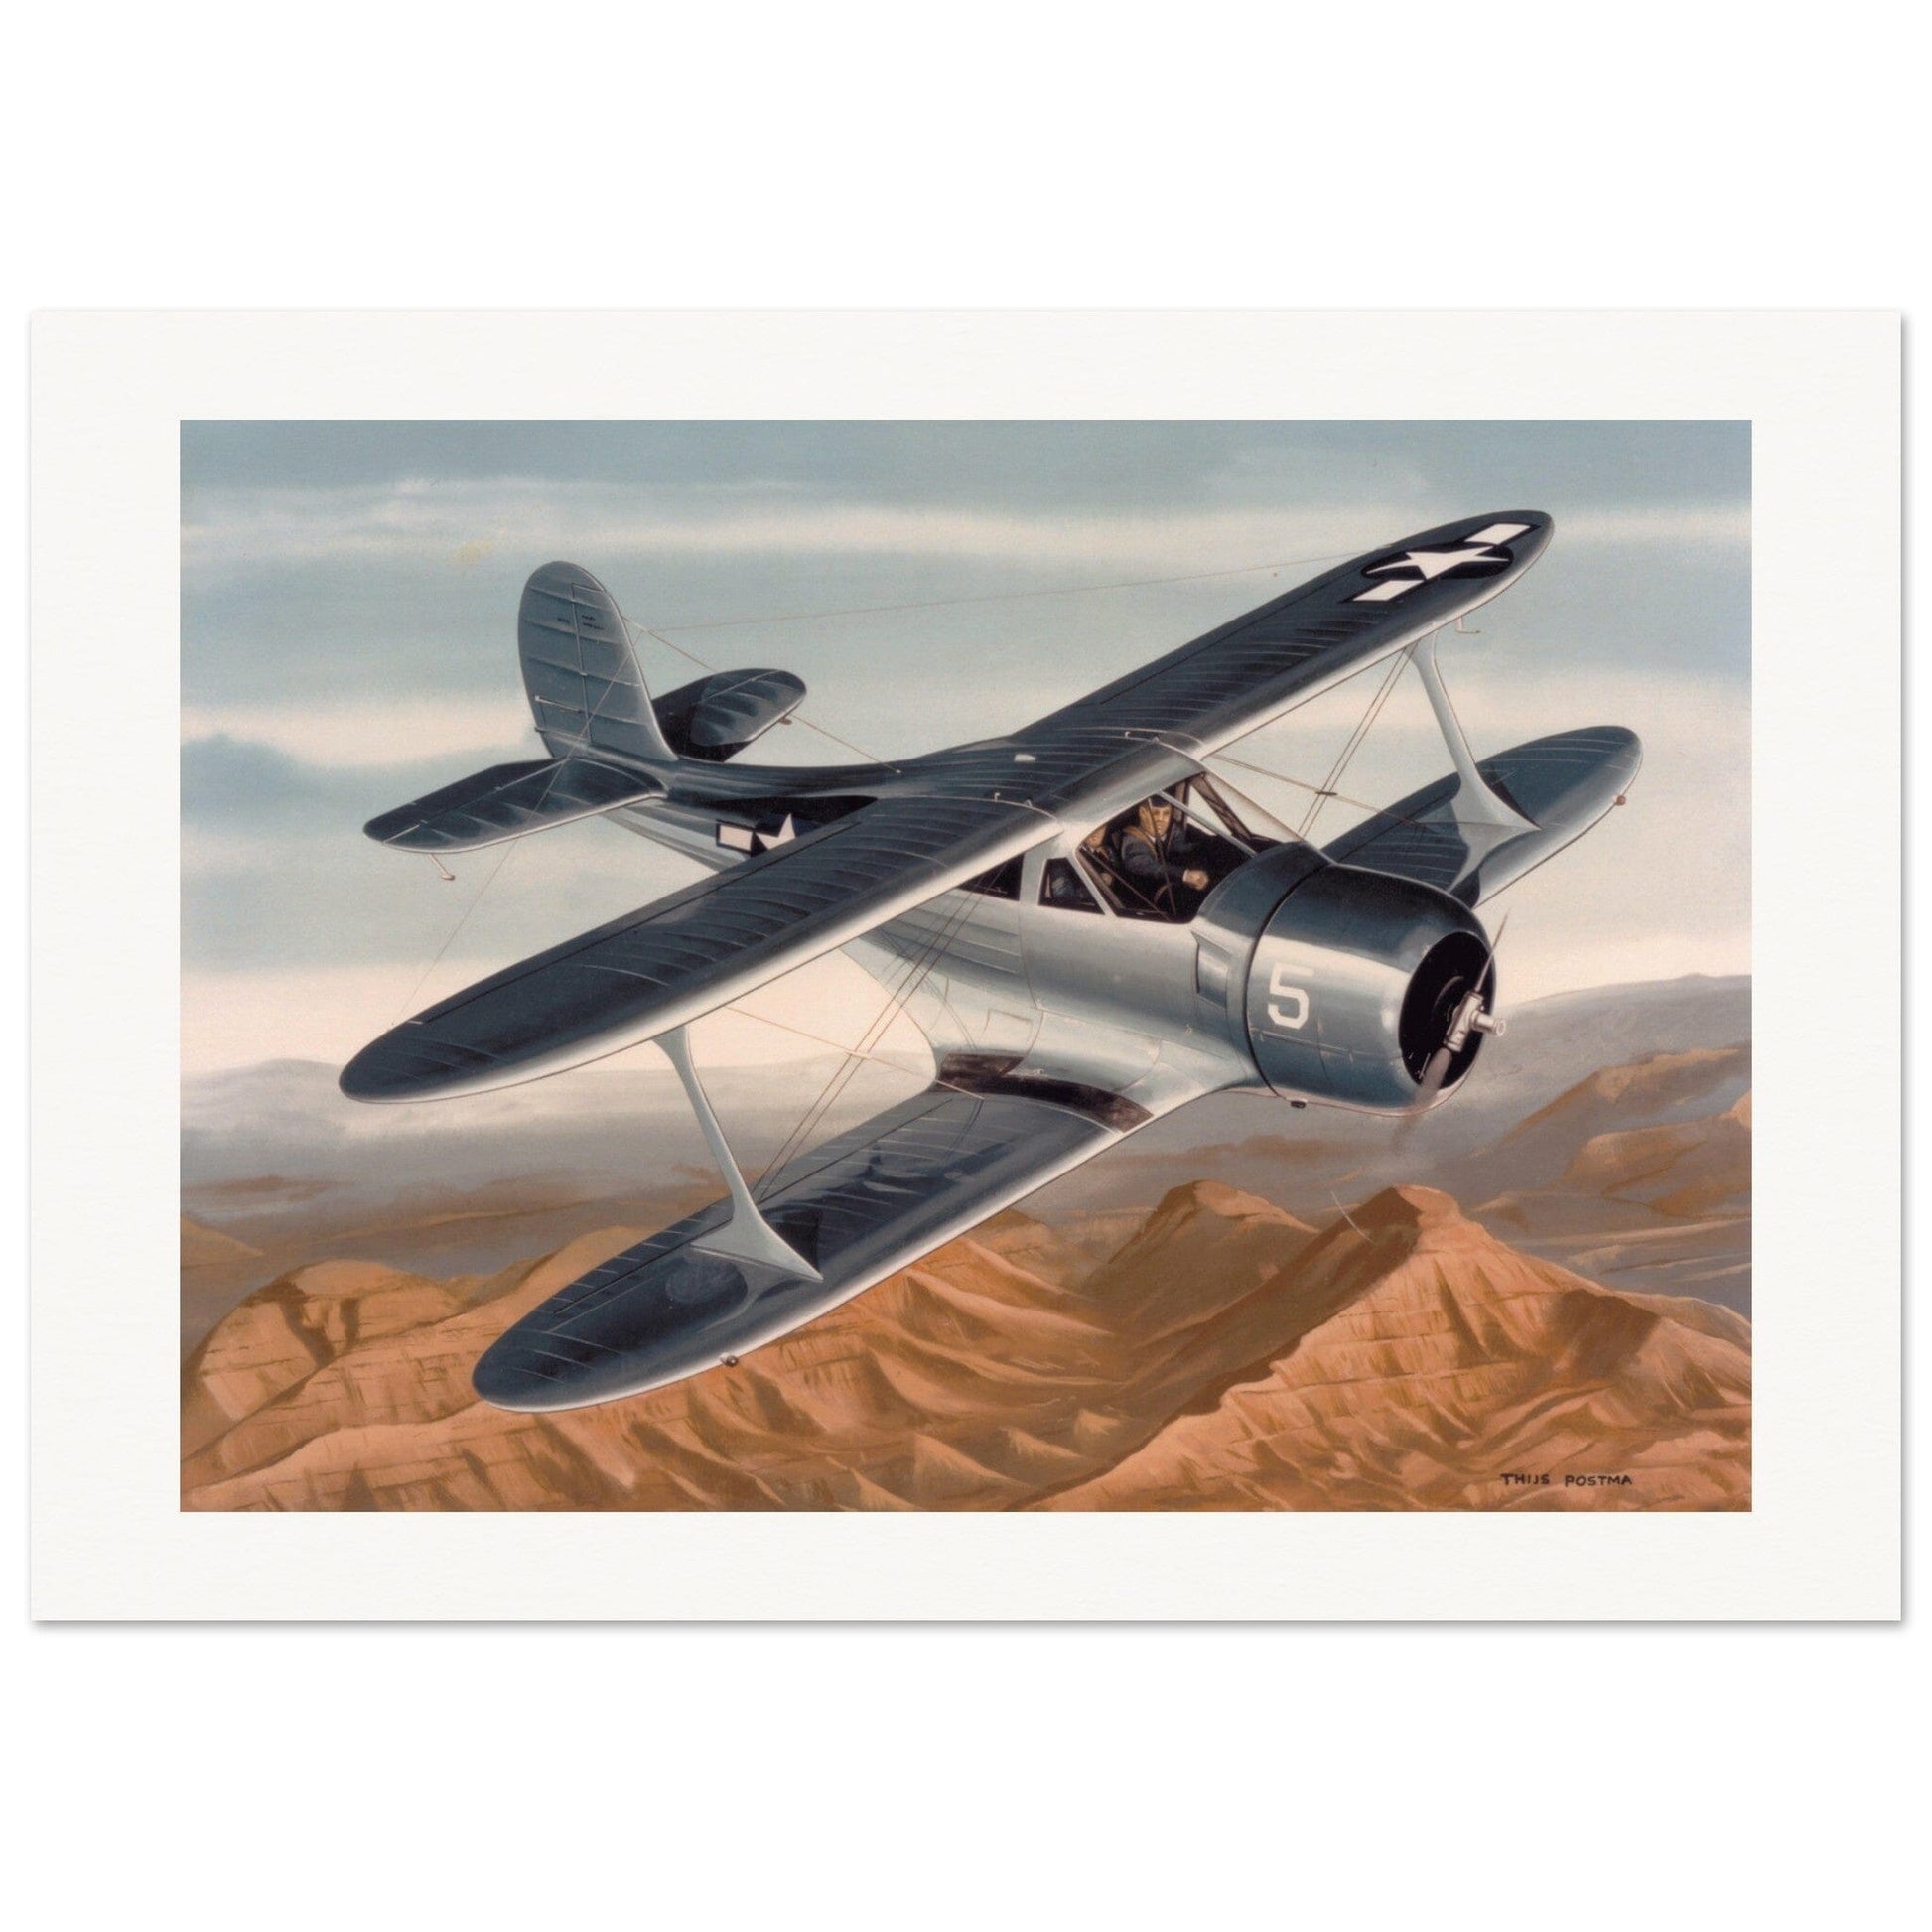 Thijs Postma - Poster - Beechcraft 17 Staggerwing USN Poster Only TP Aviation Art 70x100 cm / 28x40″ 